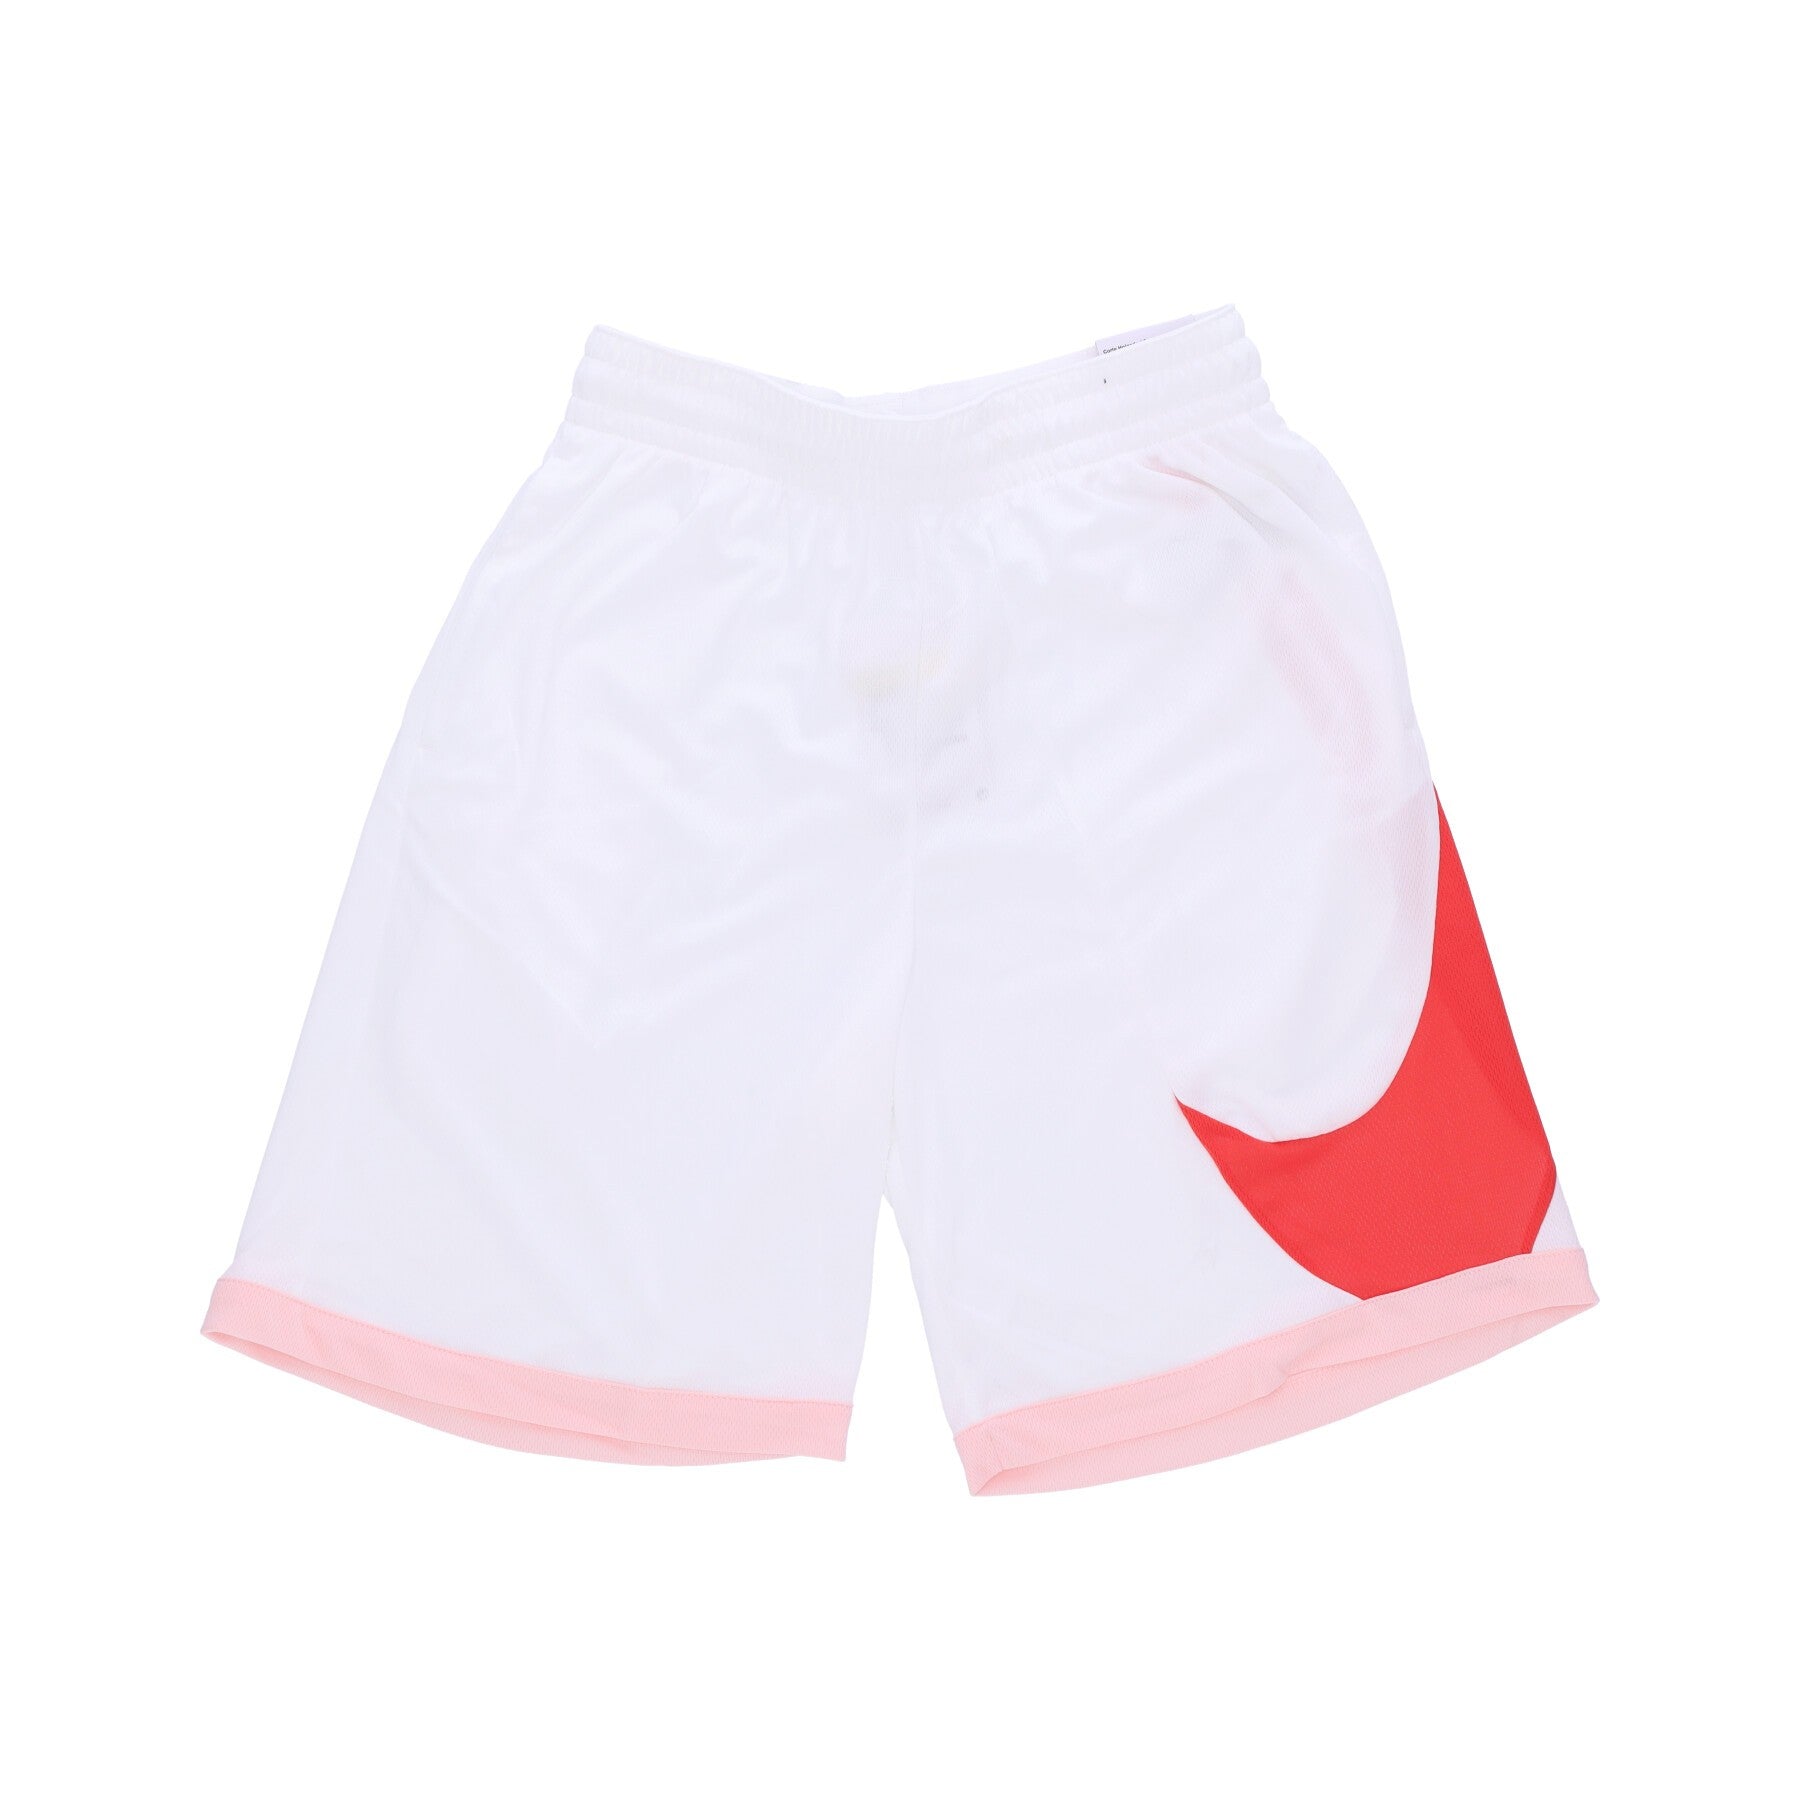 Men's Basketball Shorts Dri-fit 10in Short 3.0 White/atmosphere/track Red